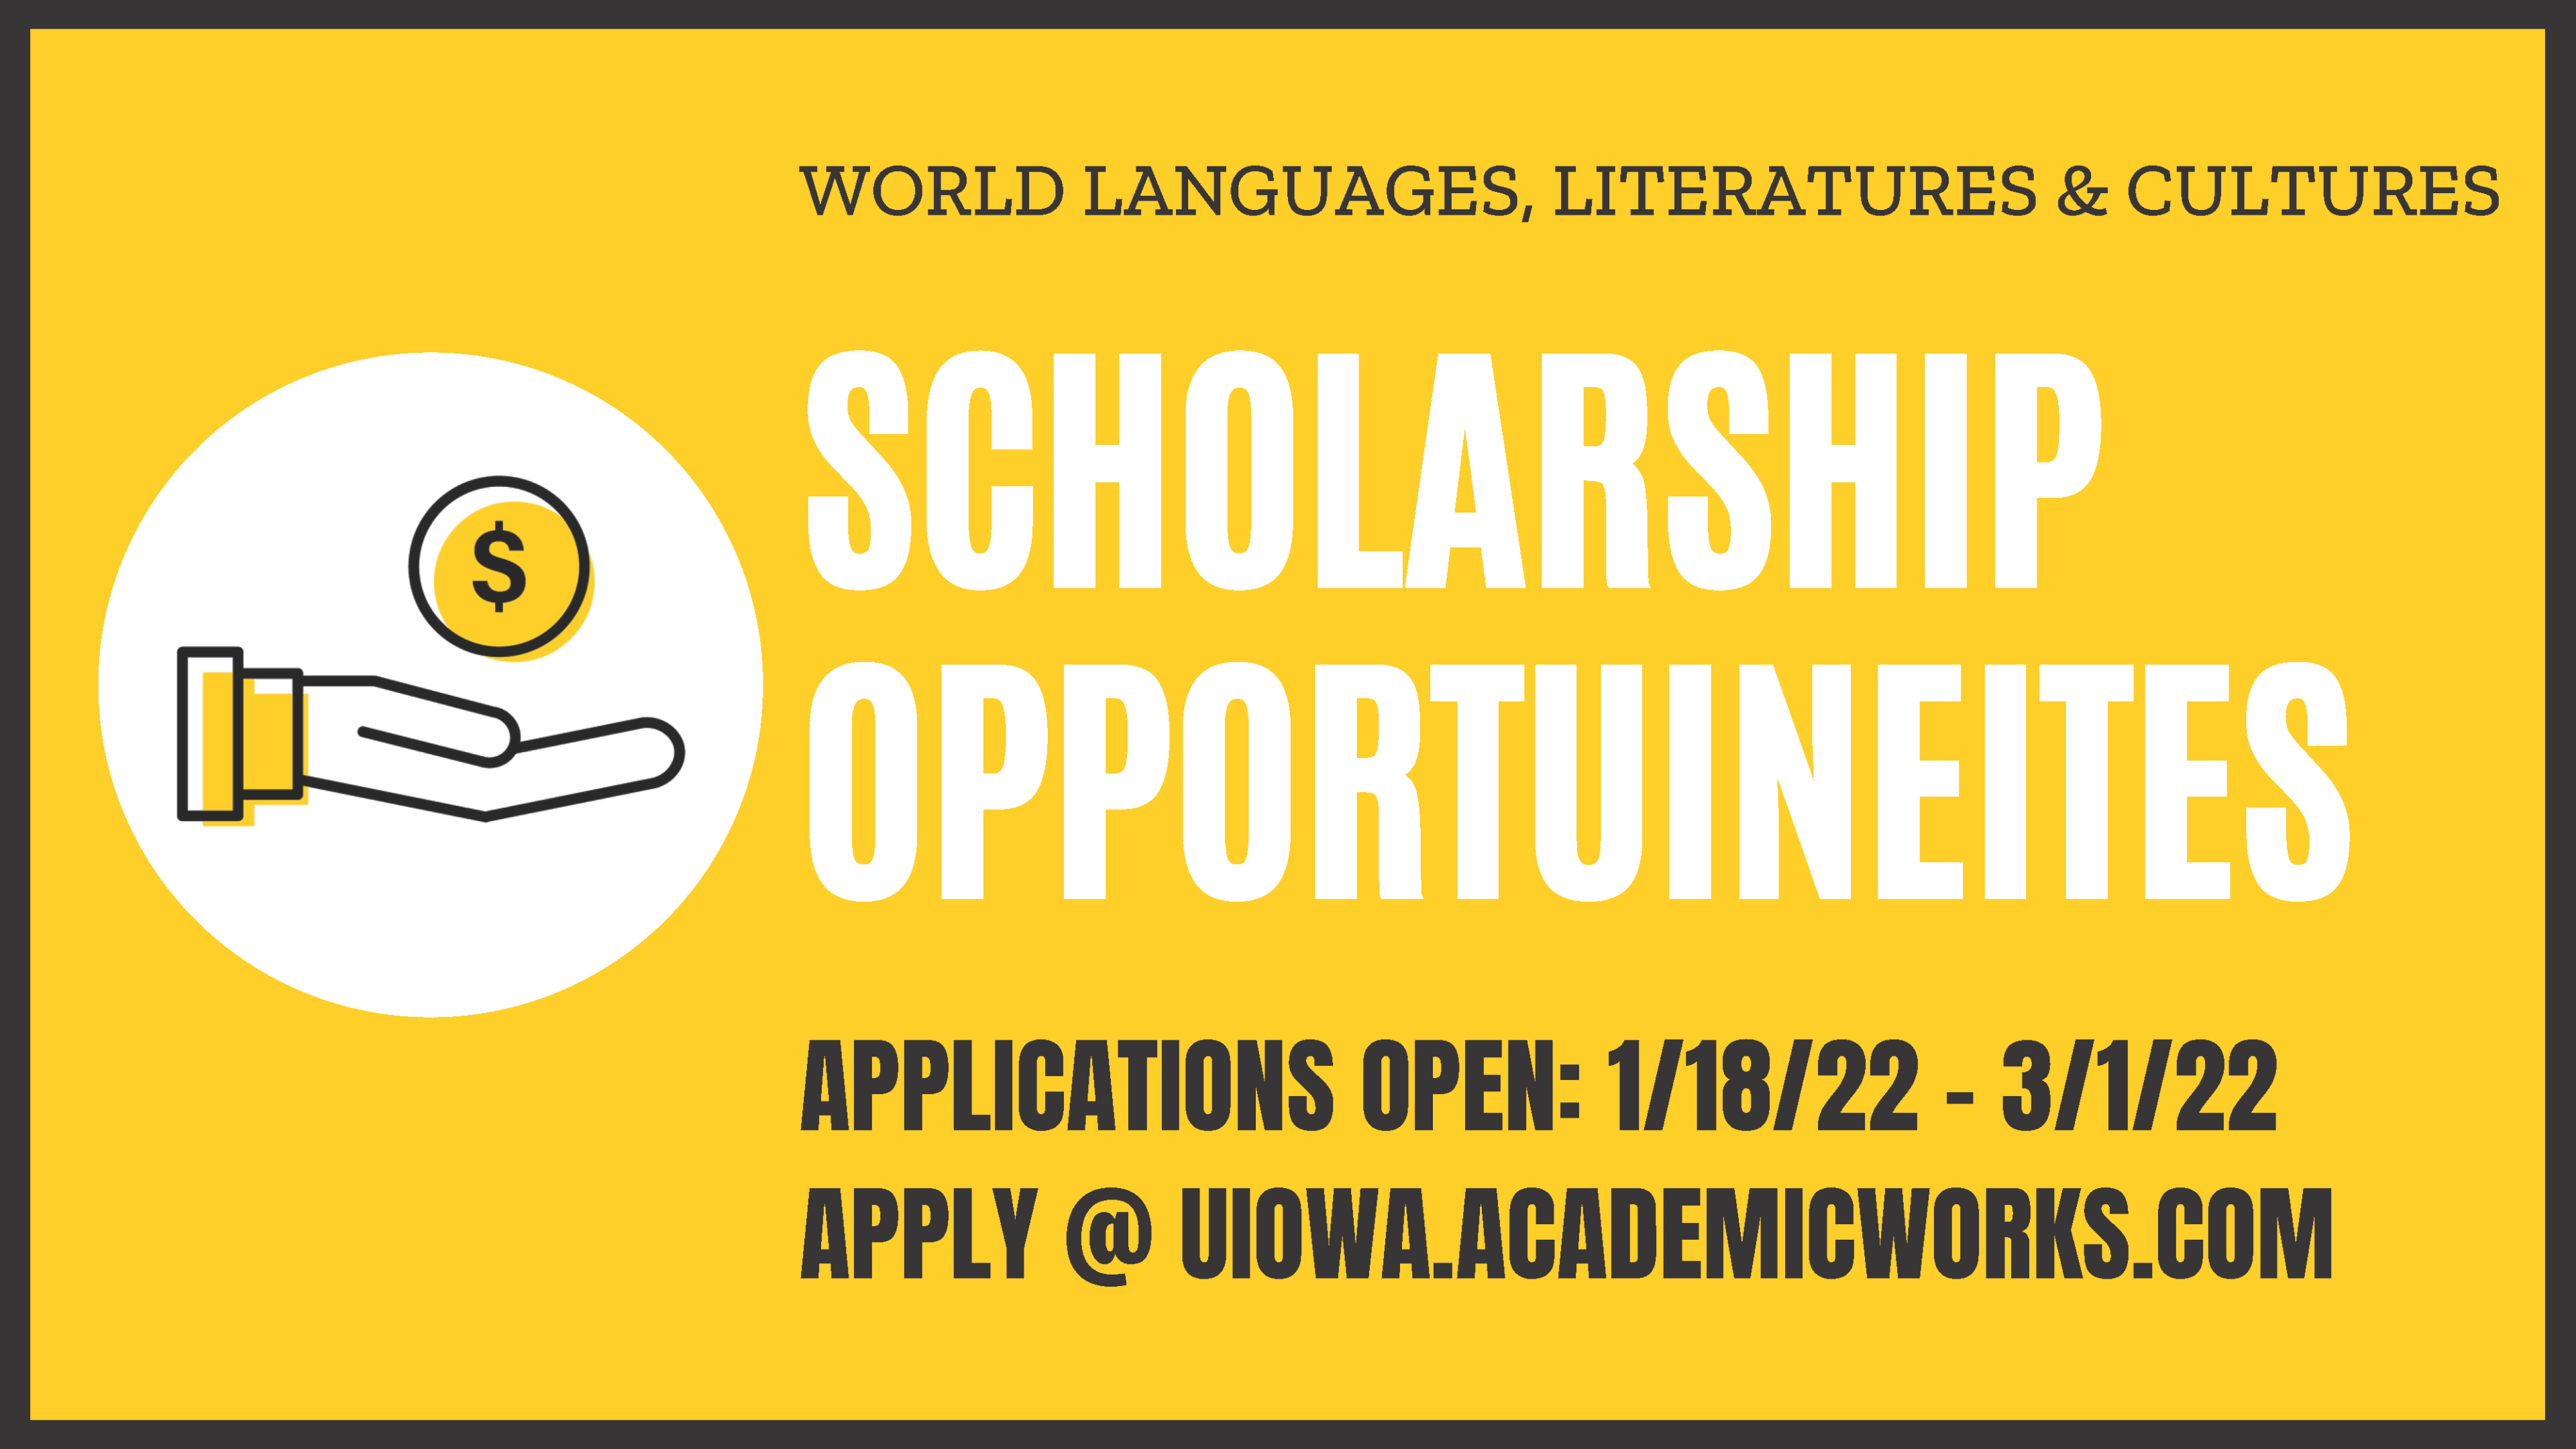 World languages literatures and cultures scholarship opportunities are available to apply at uiowa.academicworks.com from January 18 2022 through March 1 2022.